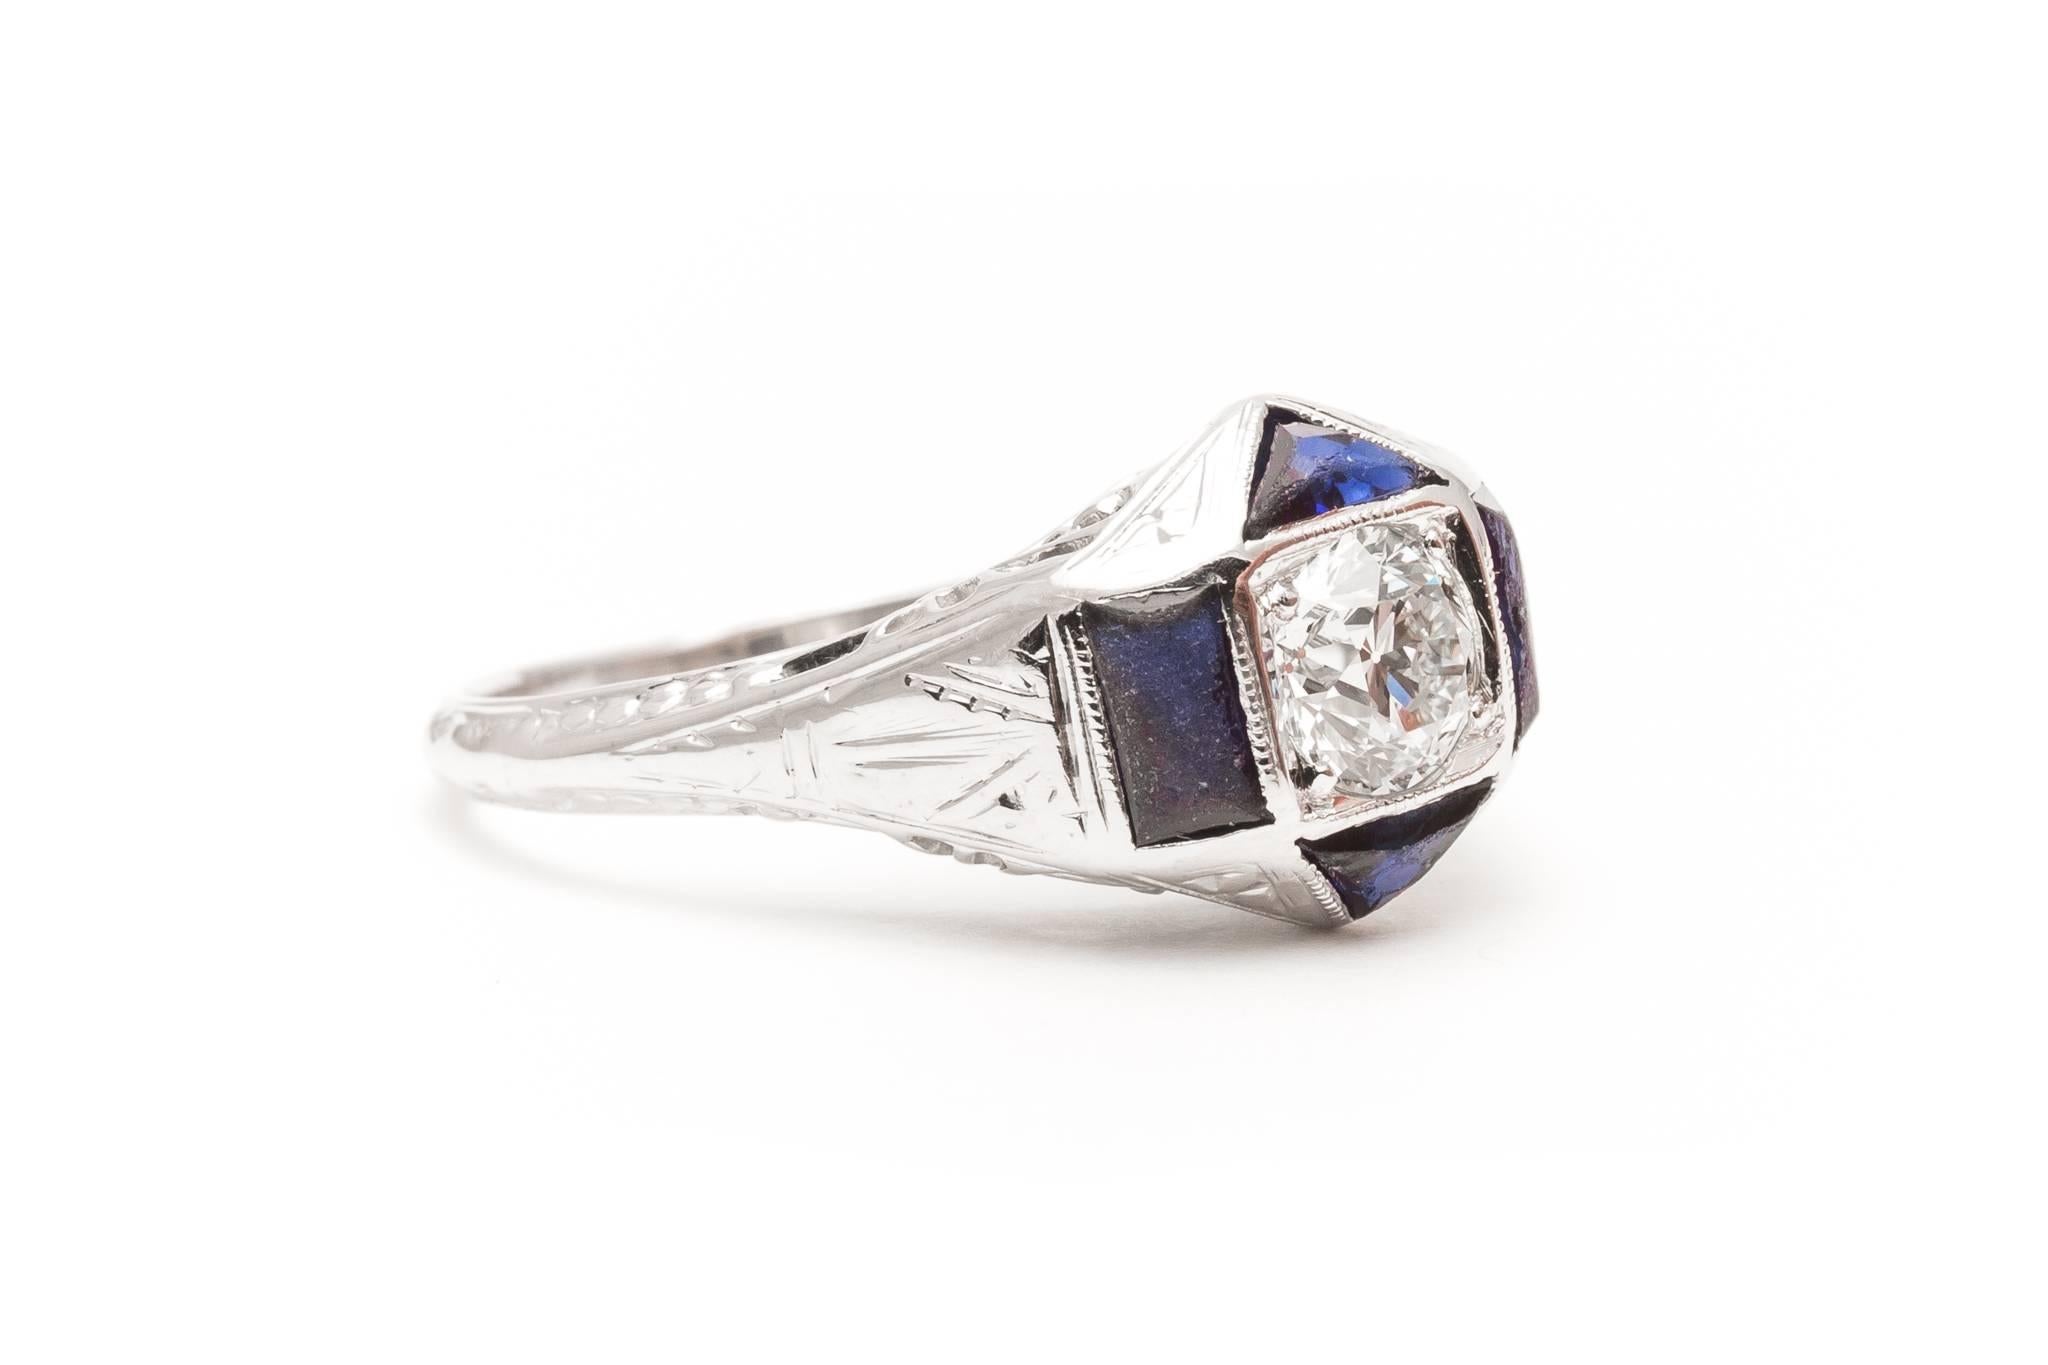 An original art deco period diamond and sapphire engagement ring in 18 karat white gold. Centered by a high quality 0.55 carat antique European cut diamond this ring features four accenting sapphires and a fantastic filigree mounting.

Grading as